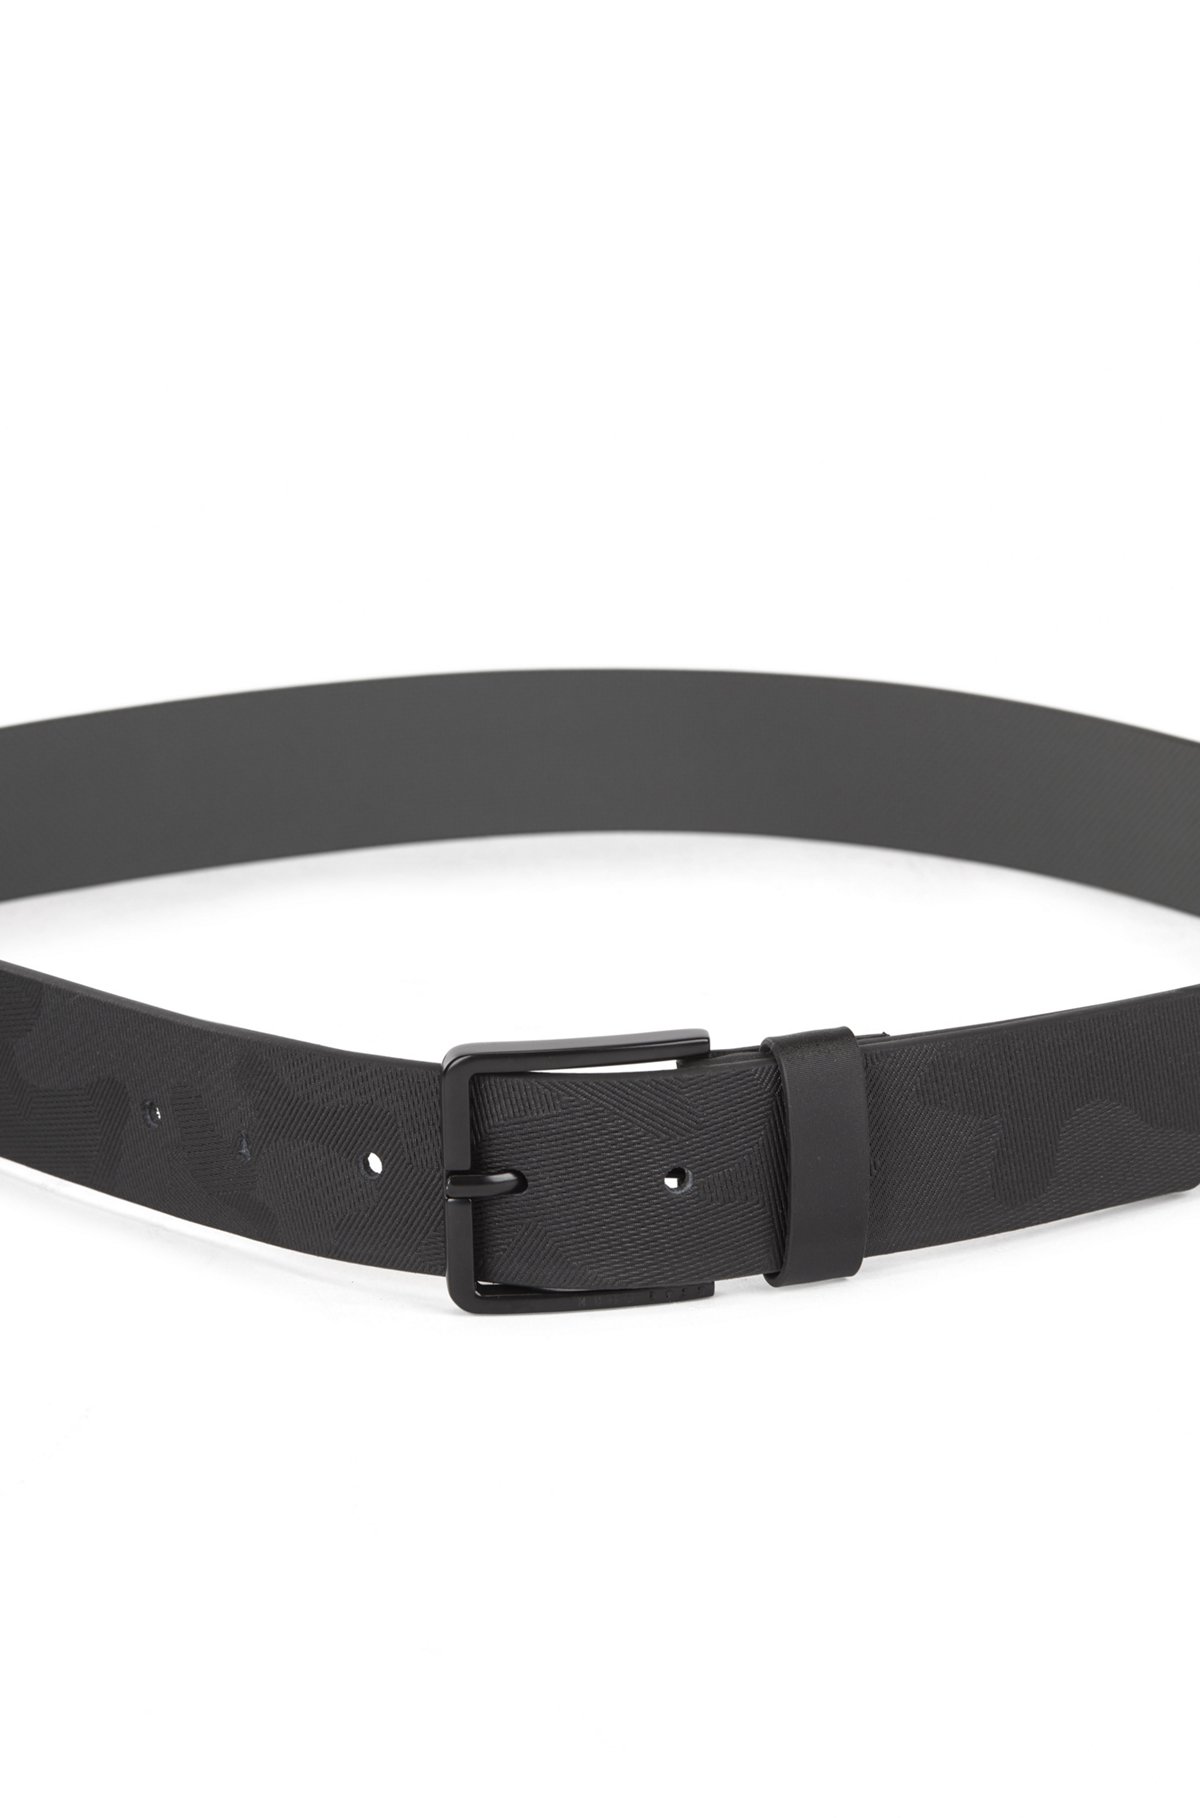 Italian-leather belt with camouflage print, Black